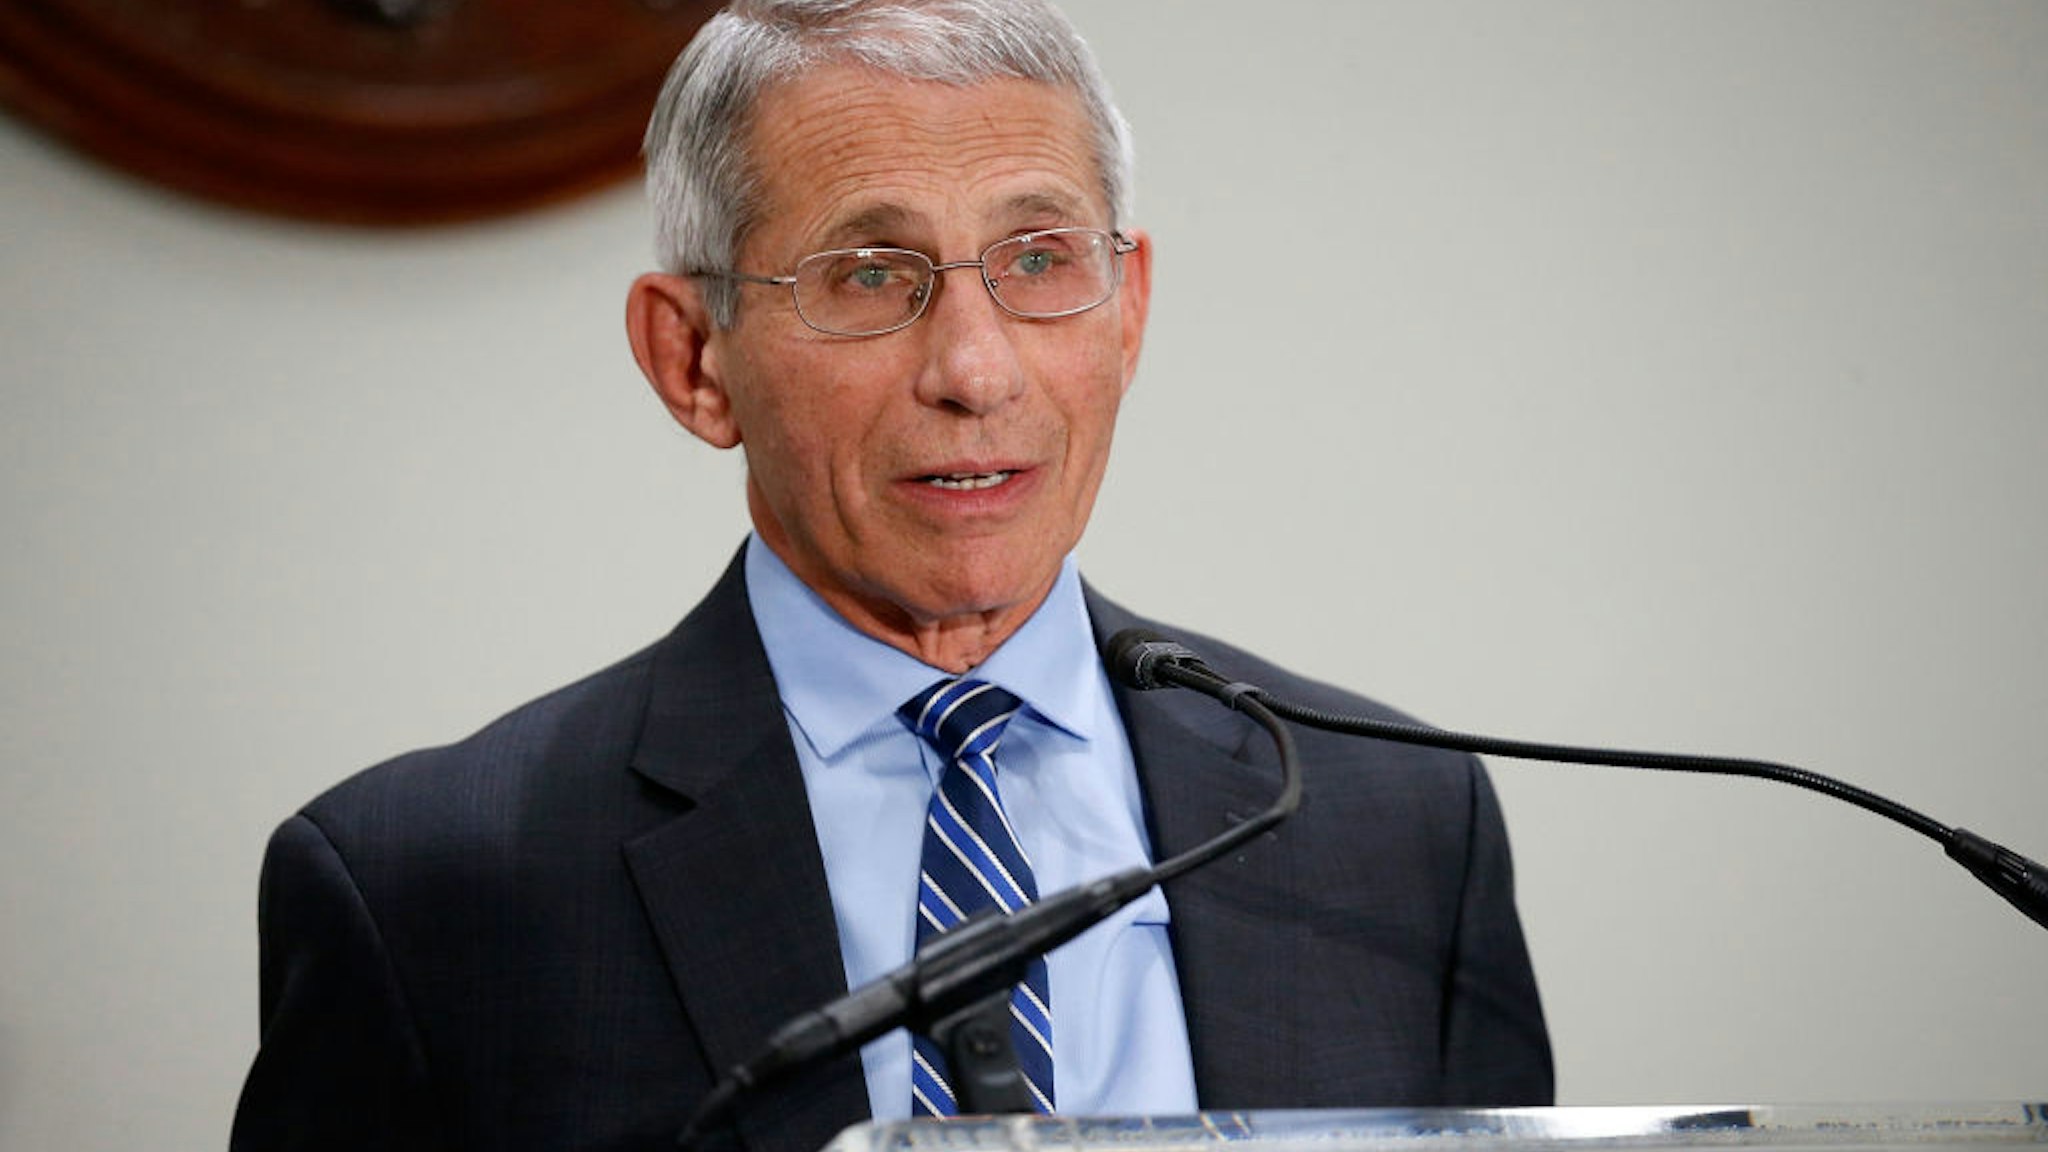 Anthony Fauci, M.D., Director, National Institute of Allergy and Infectious Diseases, National Institutes of Health (NIH), speaks at "Making AIDS History: A Roadmap for Ending the Epidemic" at the Hart Senate Building on June 14, 2017 in Washington, DC.